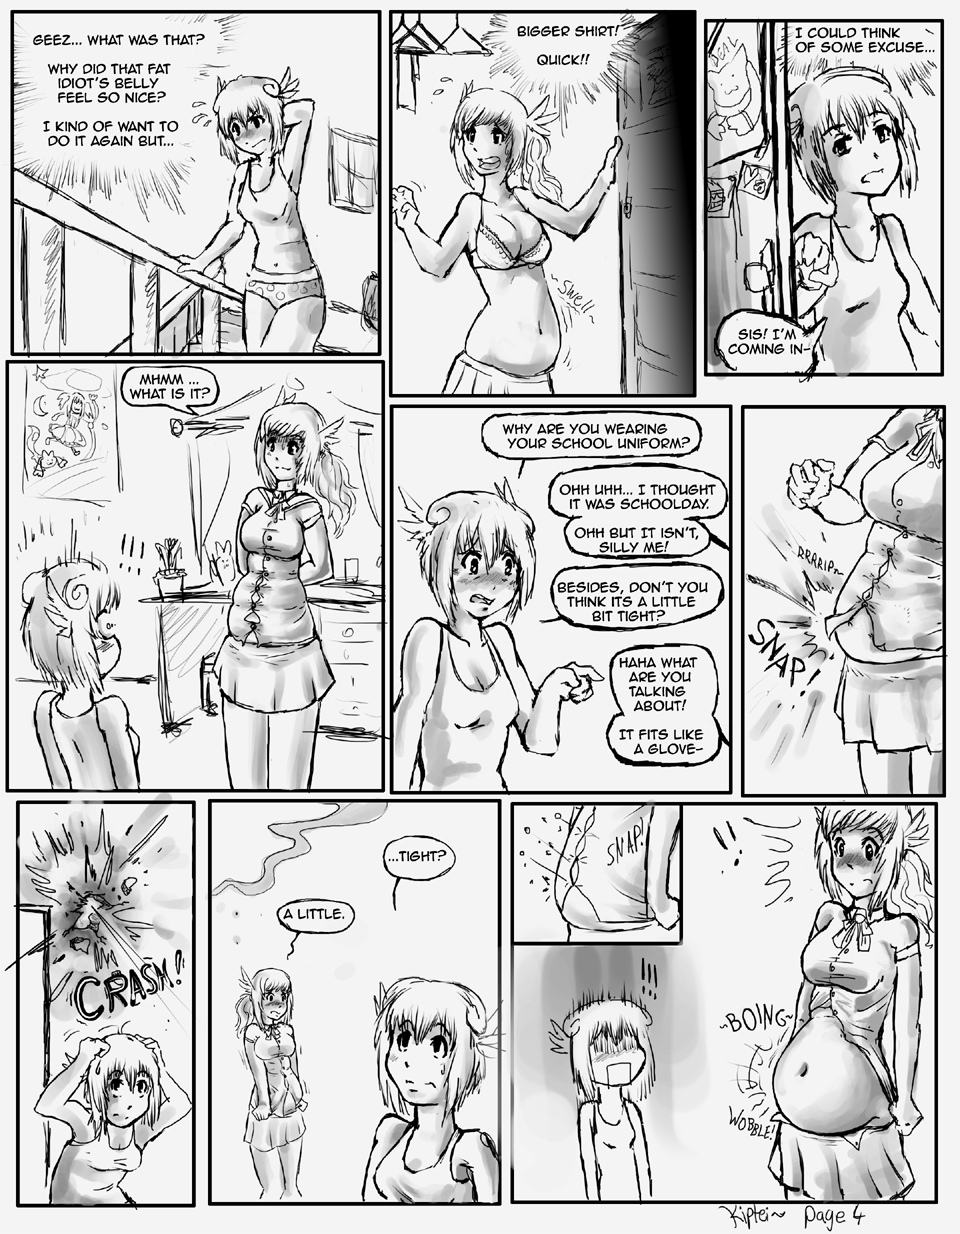 breakfast_with_sister_page4_by_kipteitei_d3oi8xd1.jpg